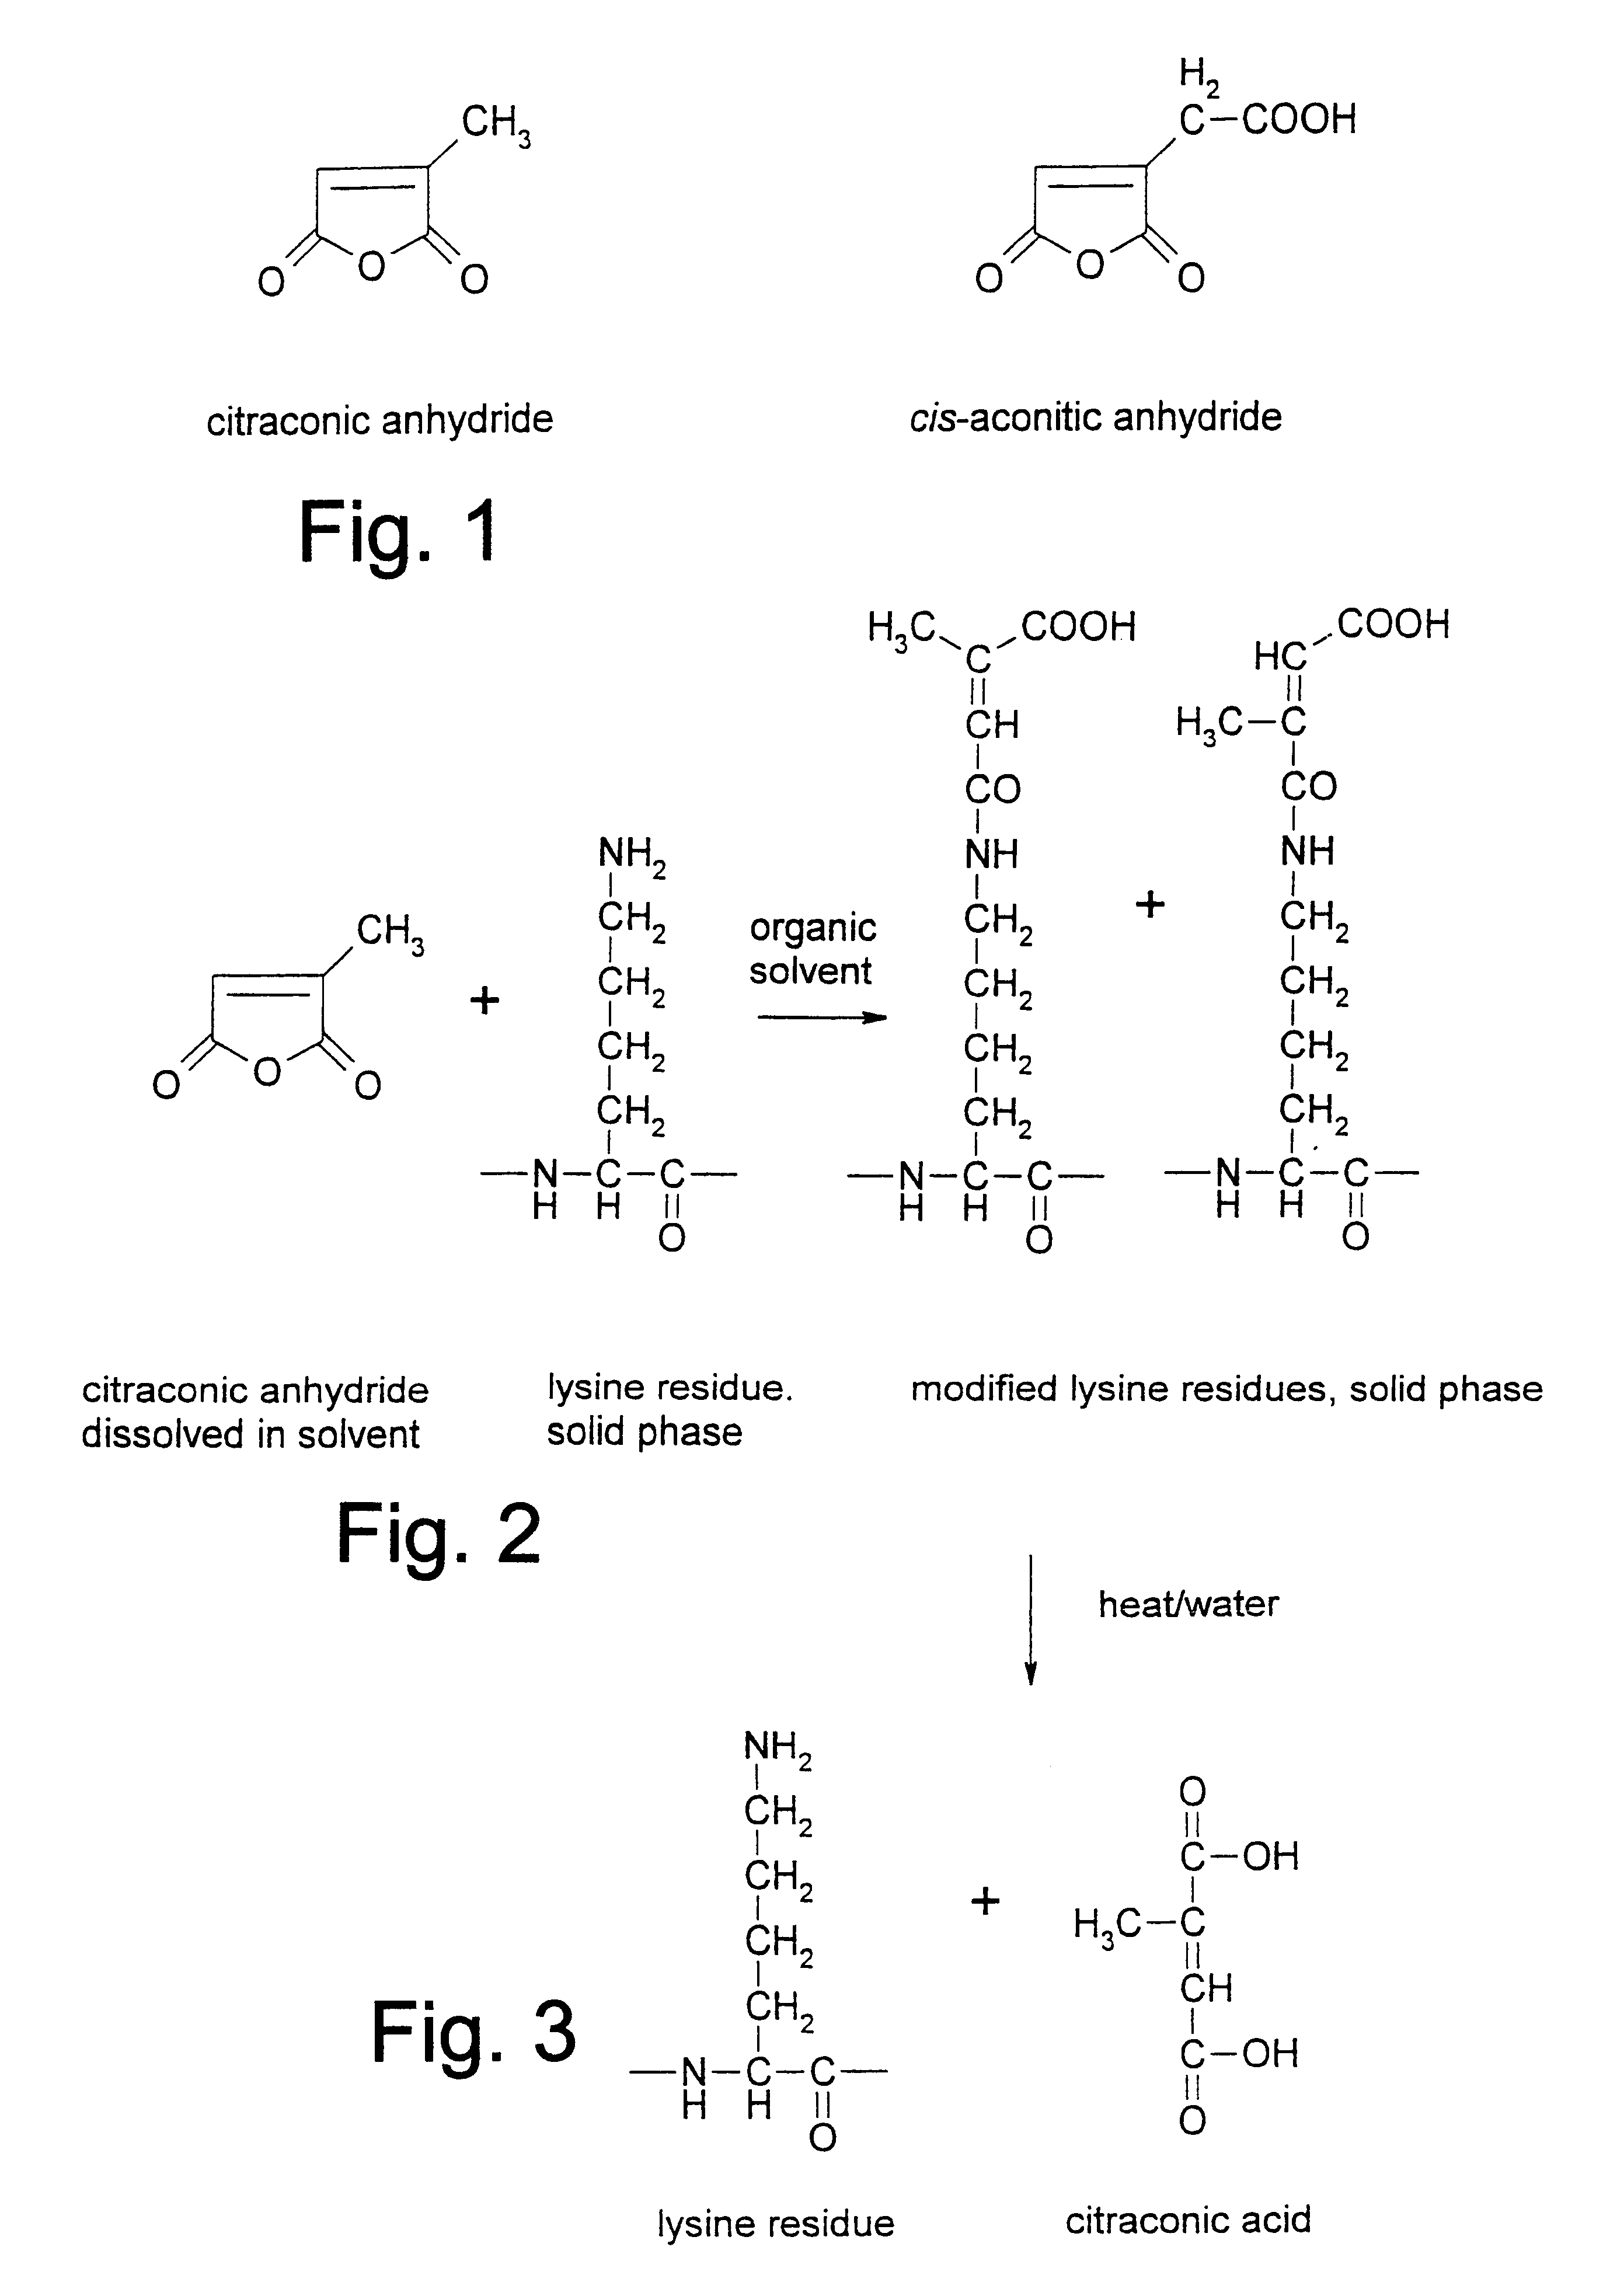 Reversible inactivation enzymes